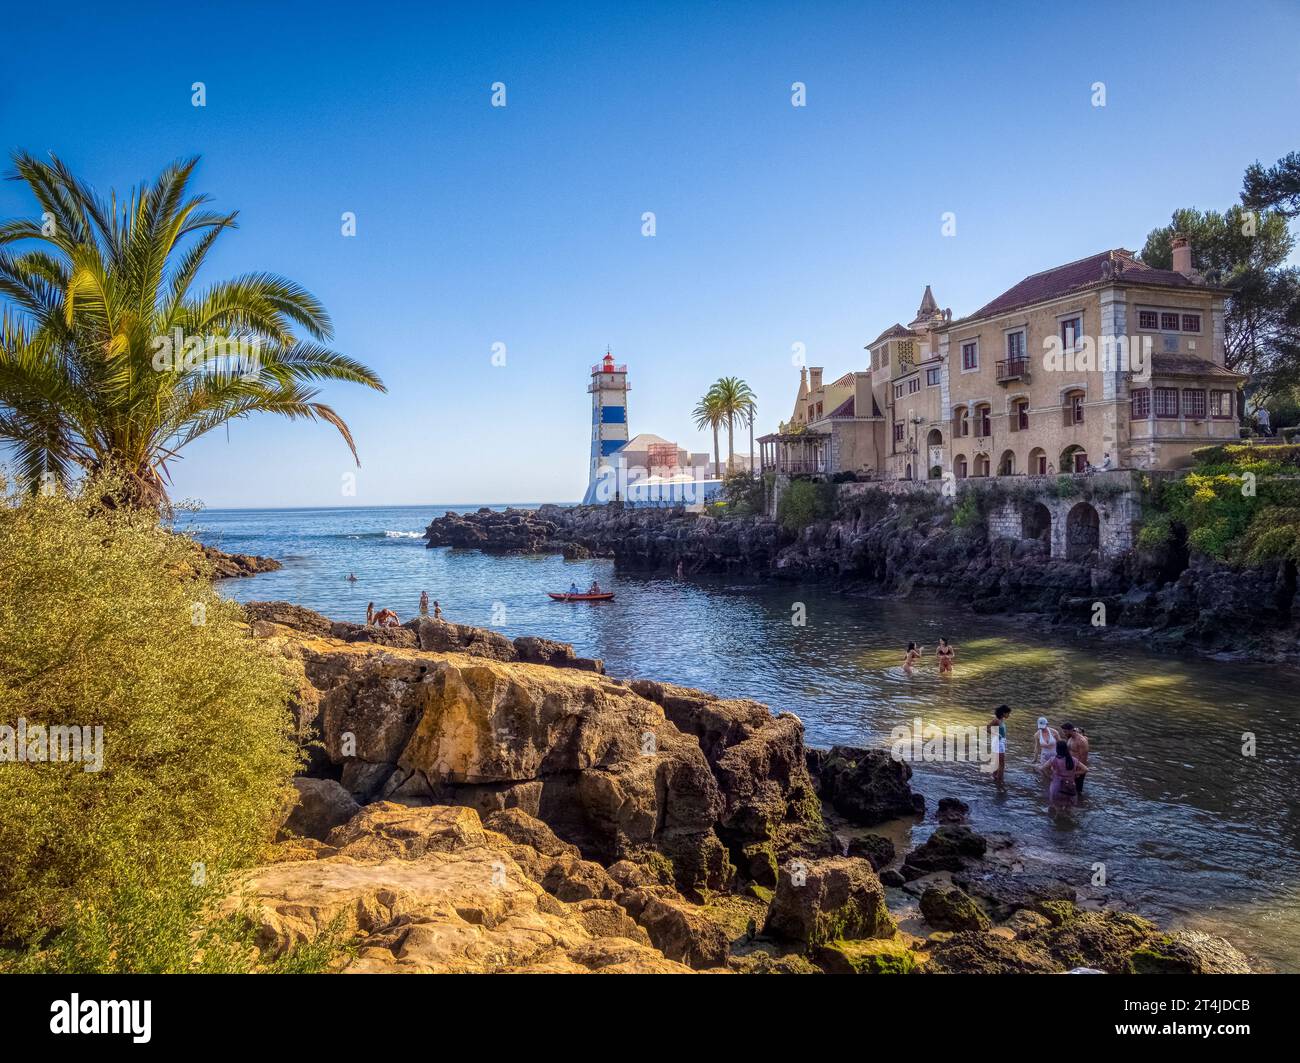 The Santa Marta Lighthouse on a small cove swimming area off the Atlantic Ocean in Cascais Portugal Stock Photo